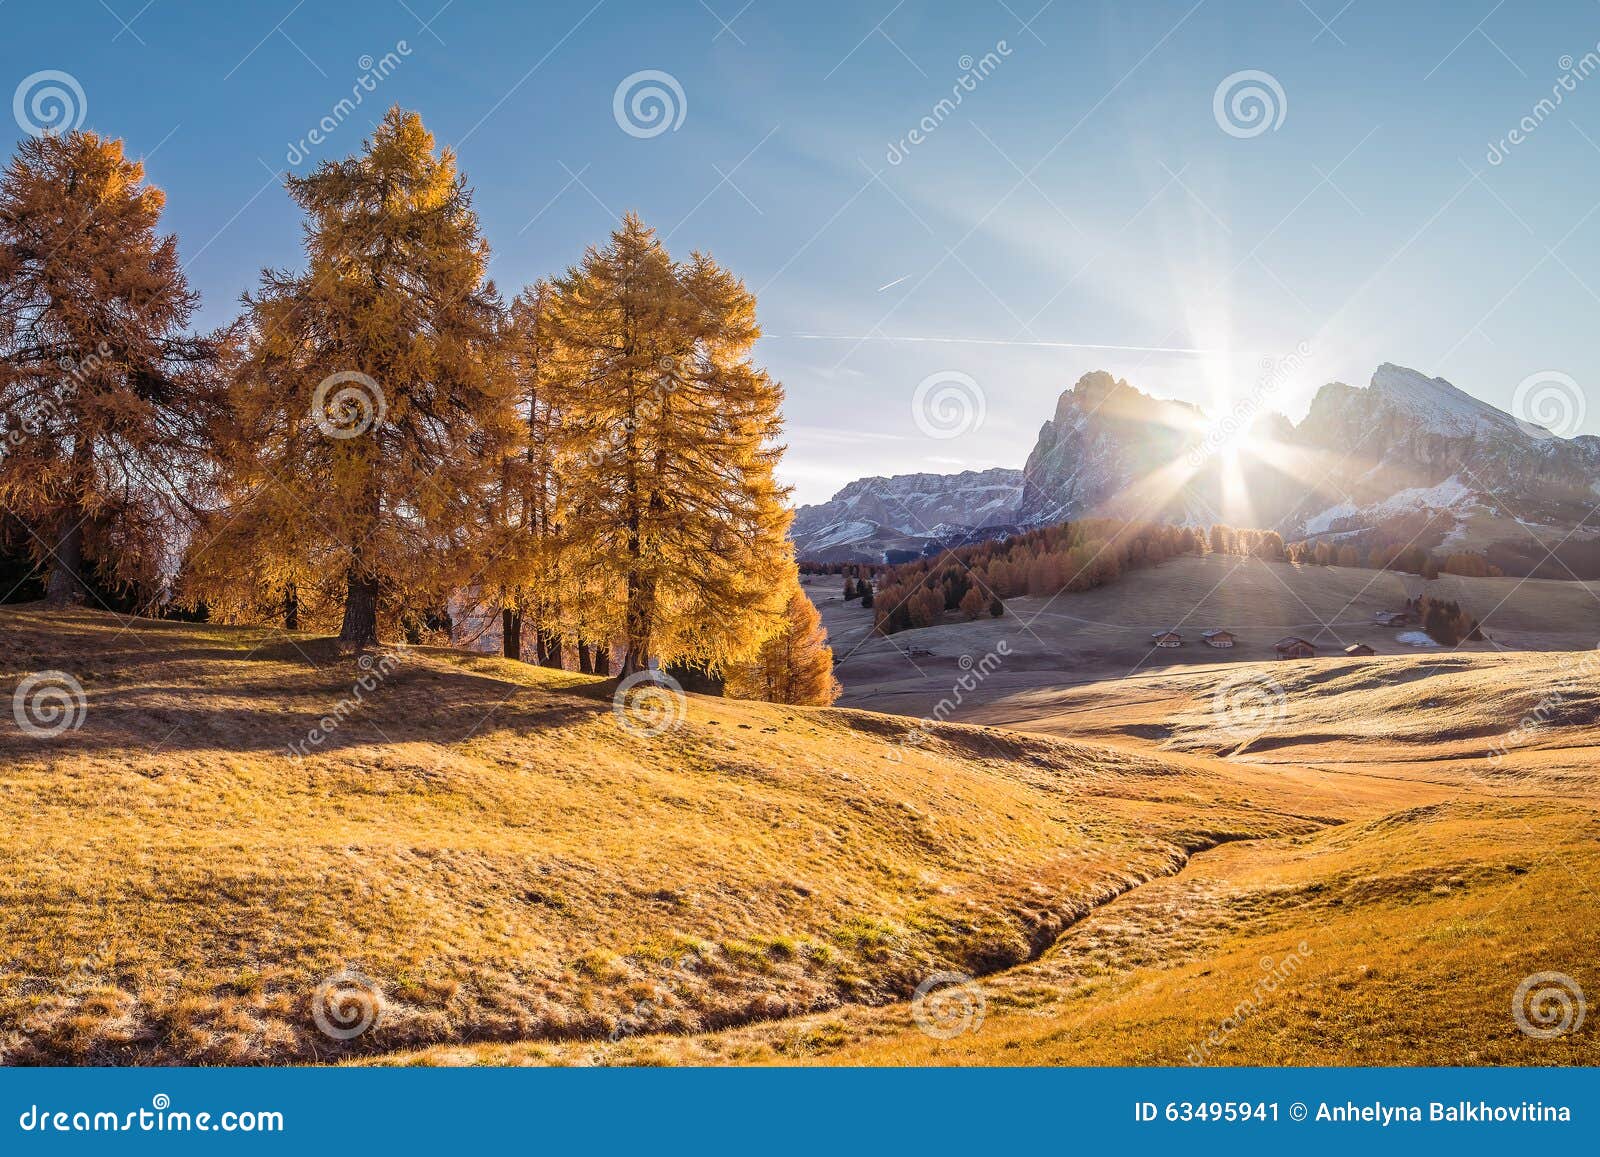 Autumn landscape with mountain and larch trees